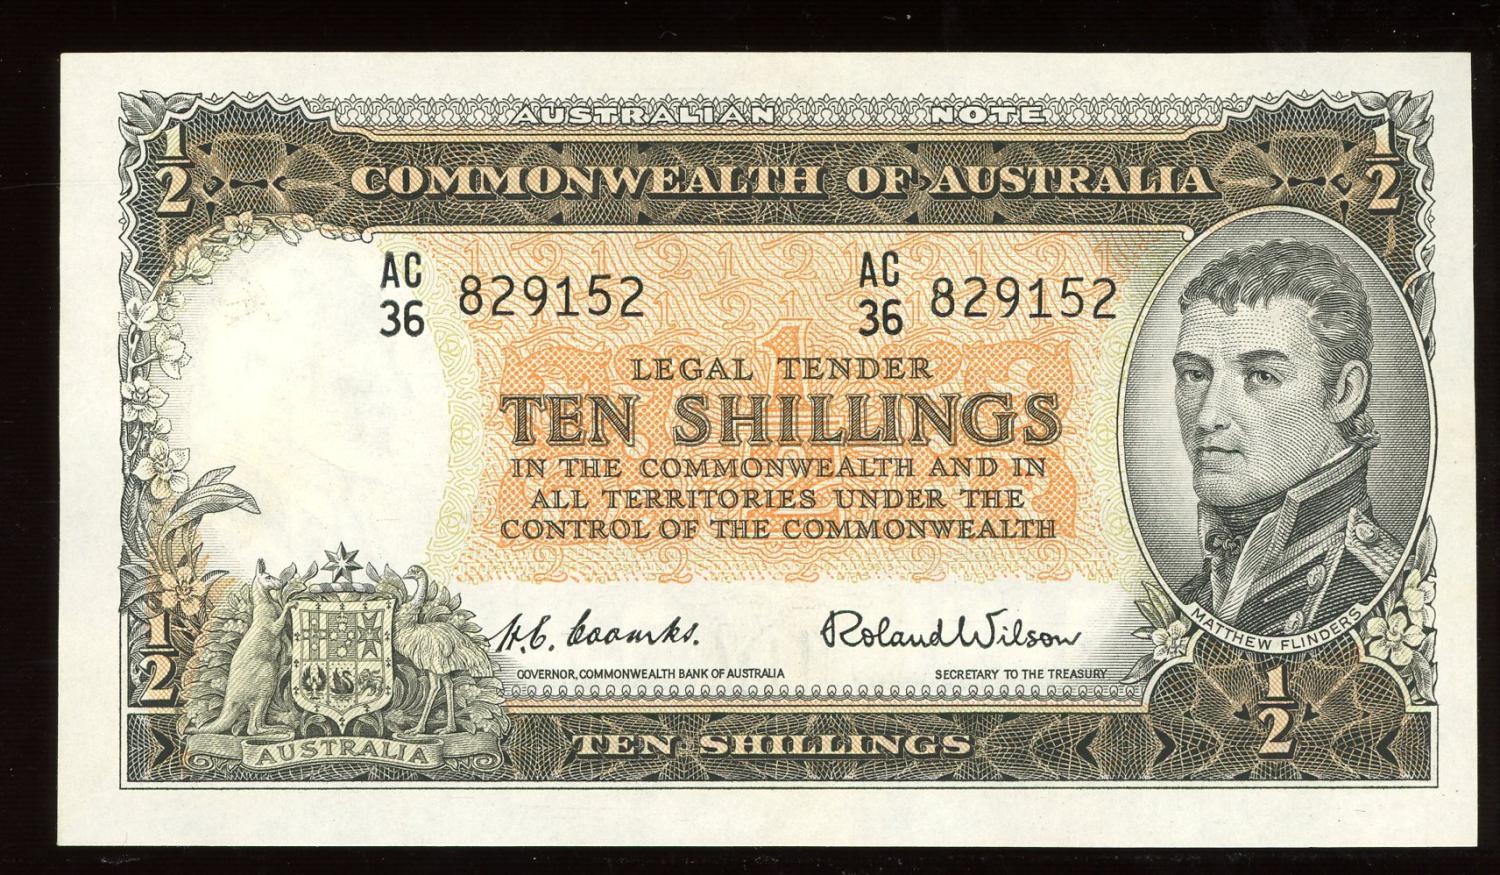 Thumbnail for 1954 Coombs-Wilson Ten Shilling Note AC36 829152 aUNC